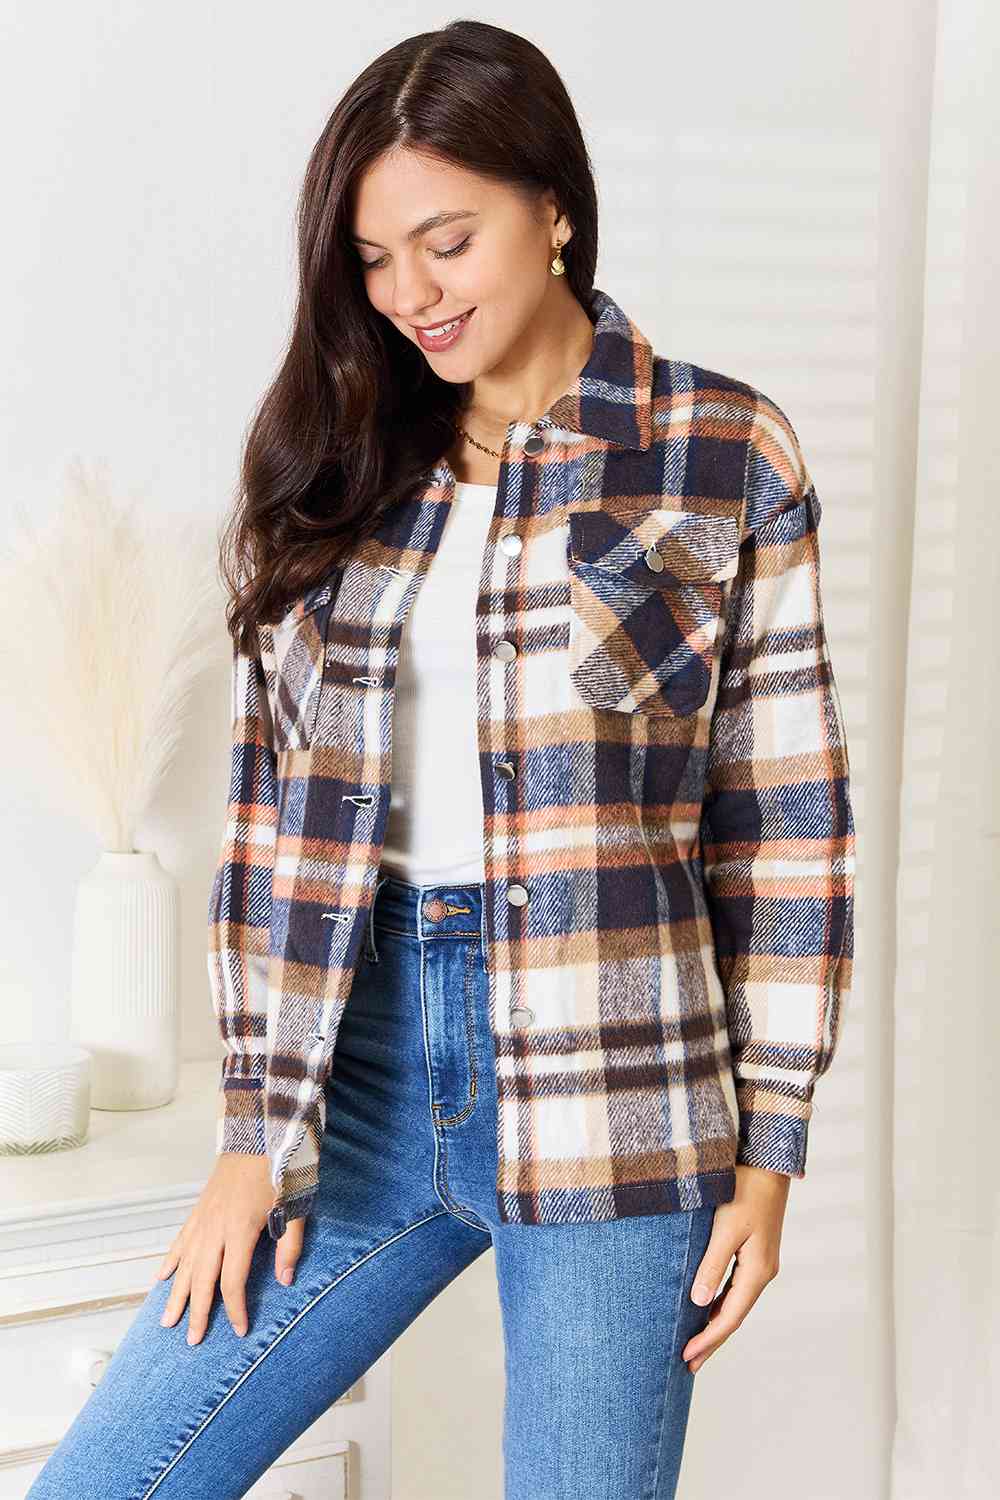 Double Take Plaid Button Front Shirt Jacket with Breast Pockets - The Teal Antler Boutique